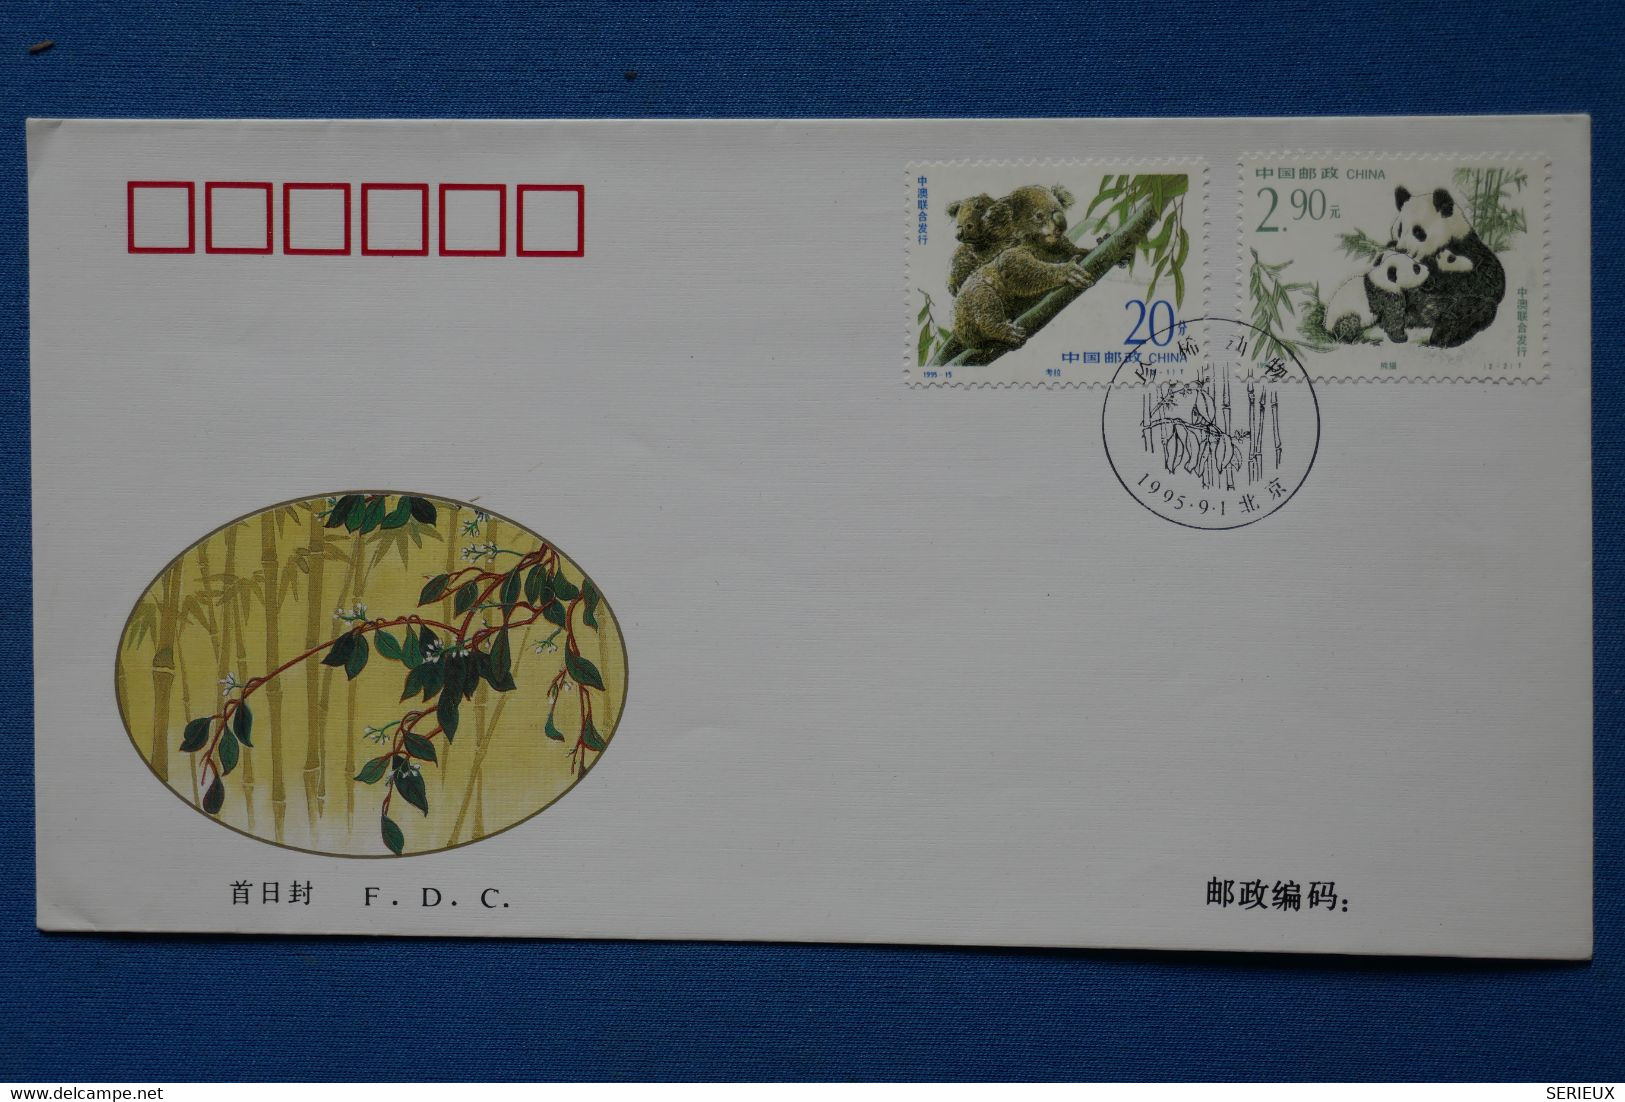 W9 CHINA  BELLE   LETTRE FDC  1995 CHINE  NON VOYAGEE + T P PANDA   + AFFRANCH. INTERESSANT - Lettres & Documents